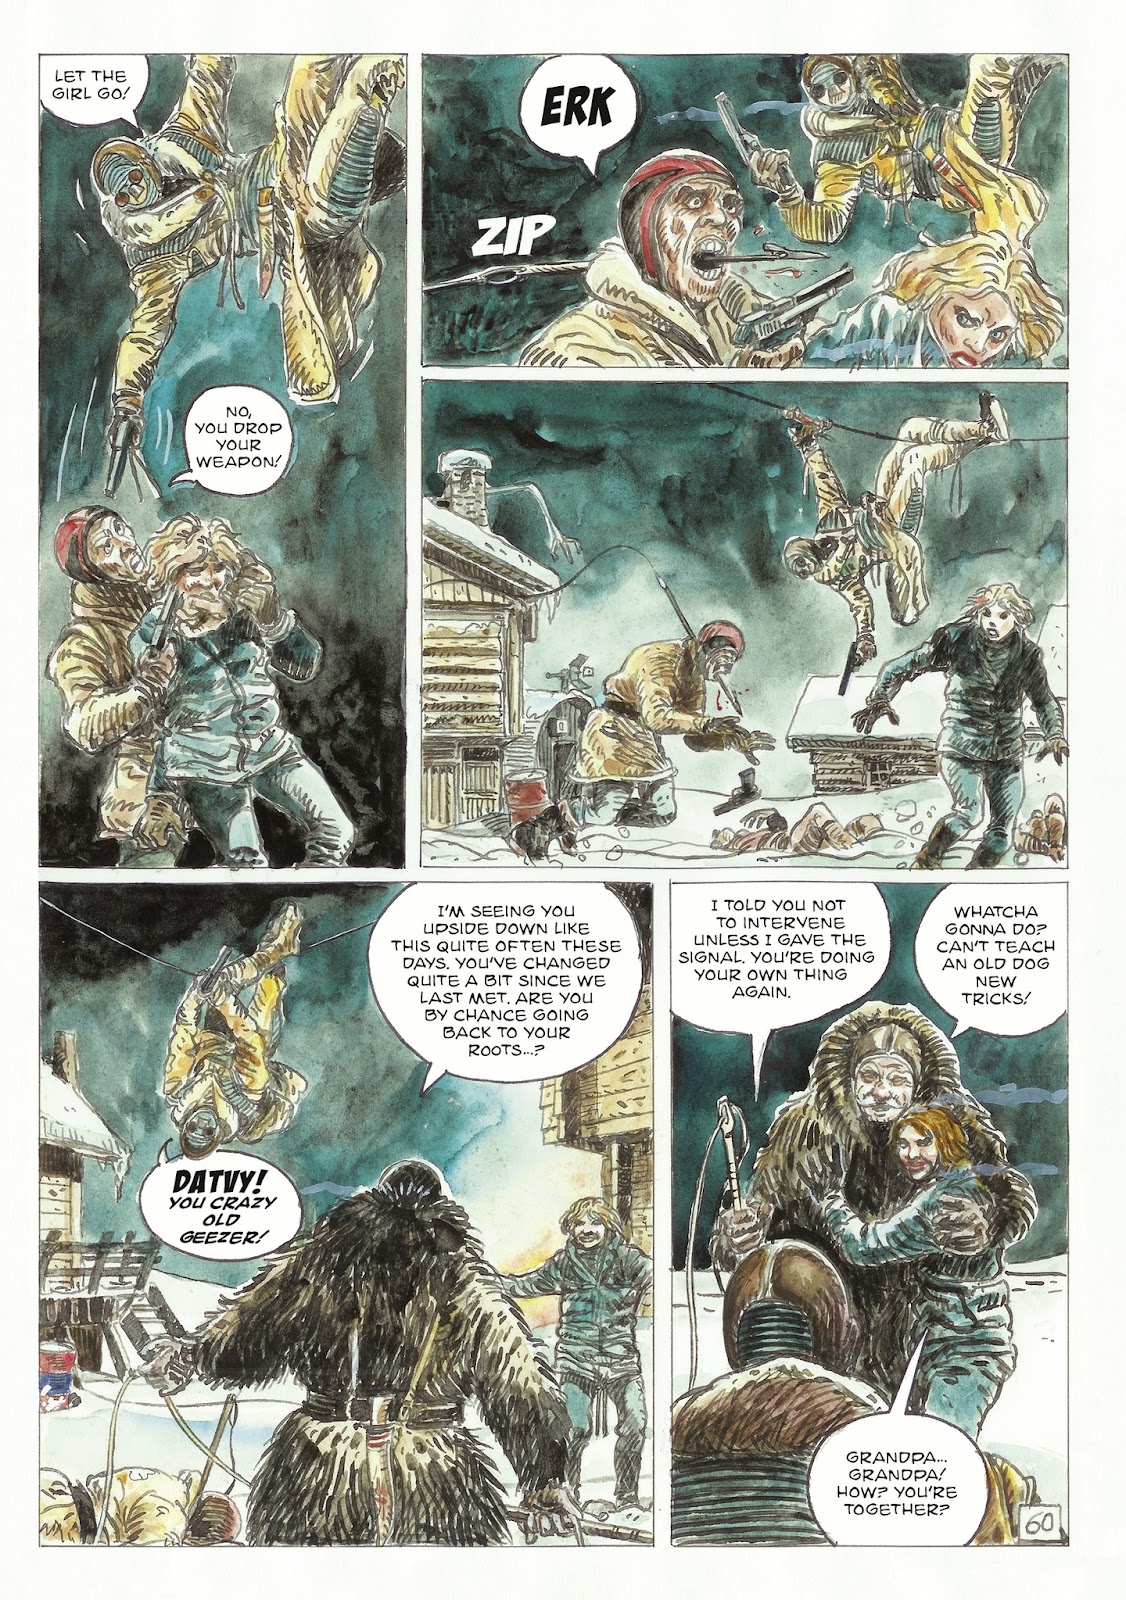 The Man With the Bear issue 2 - Page 6